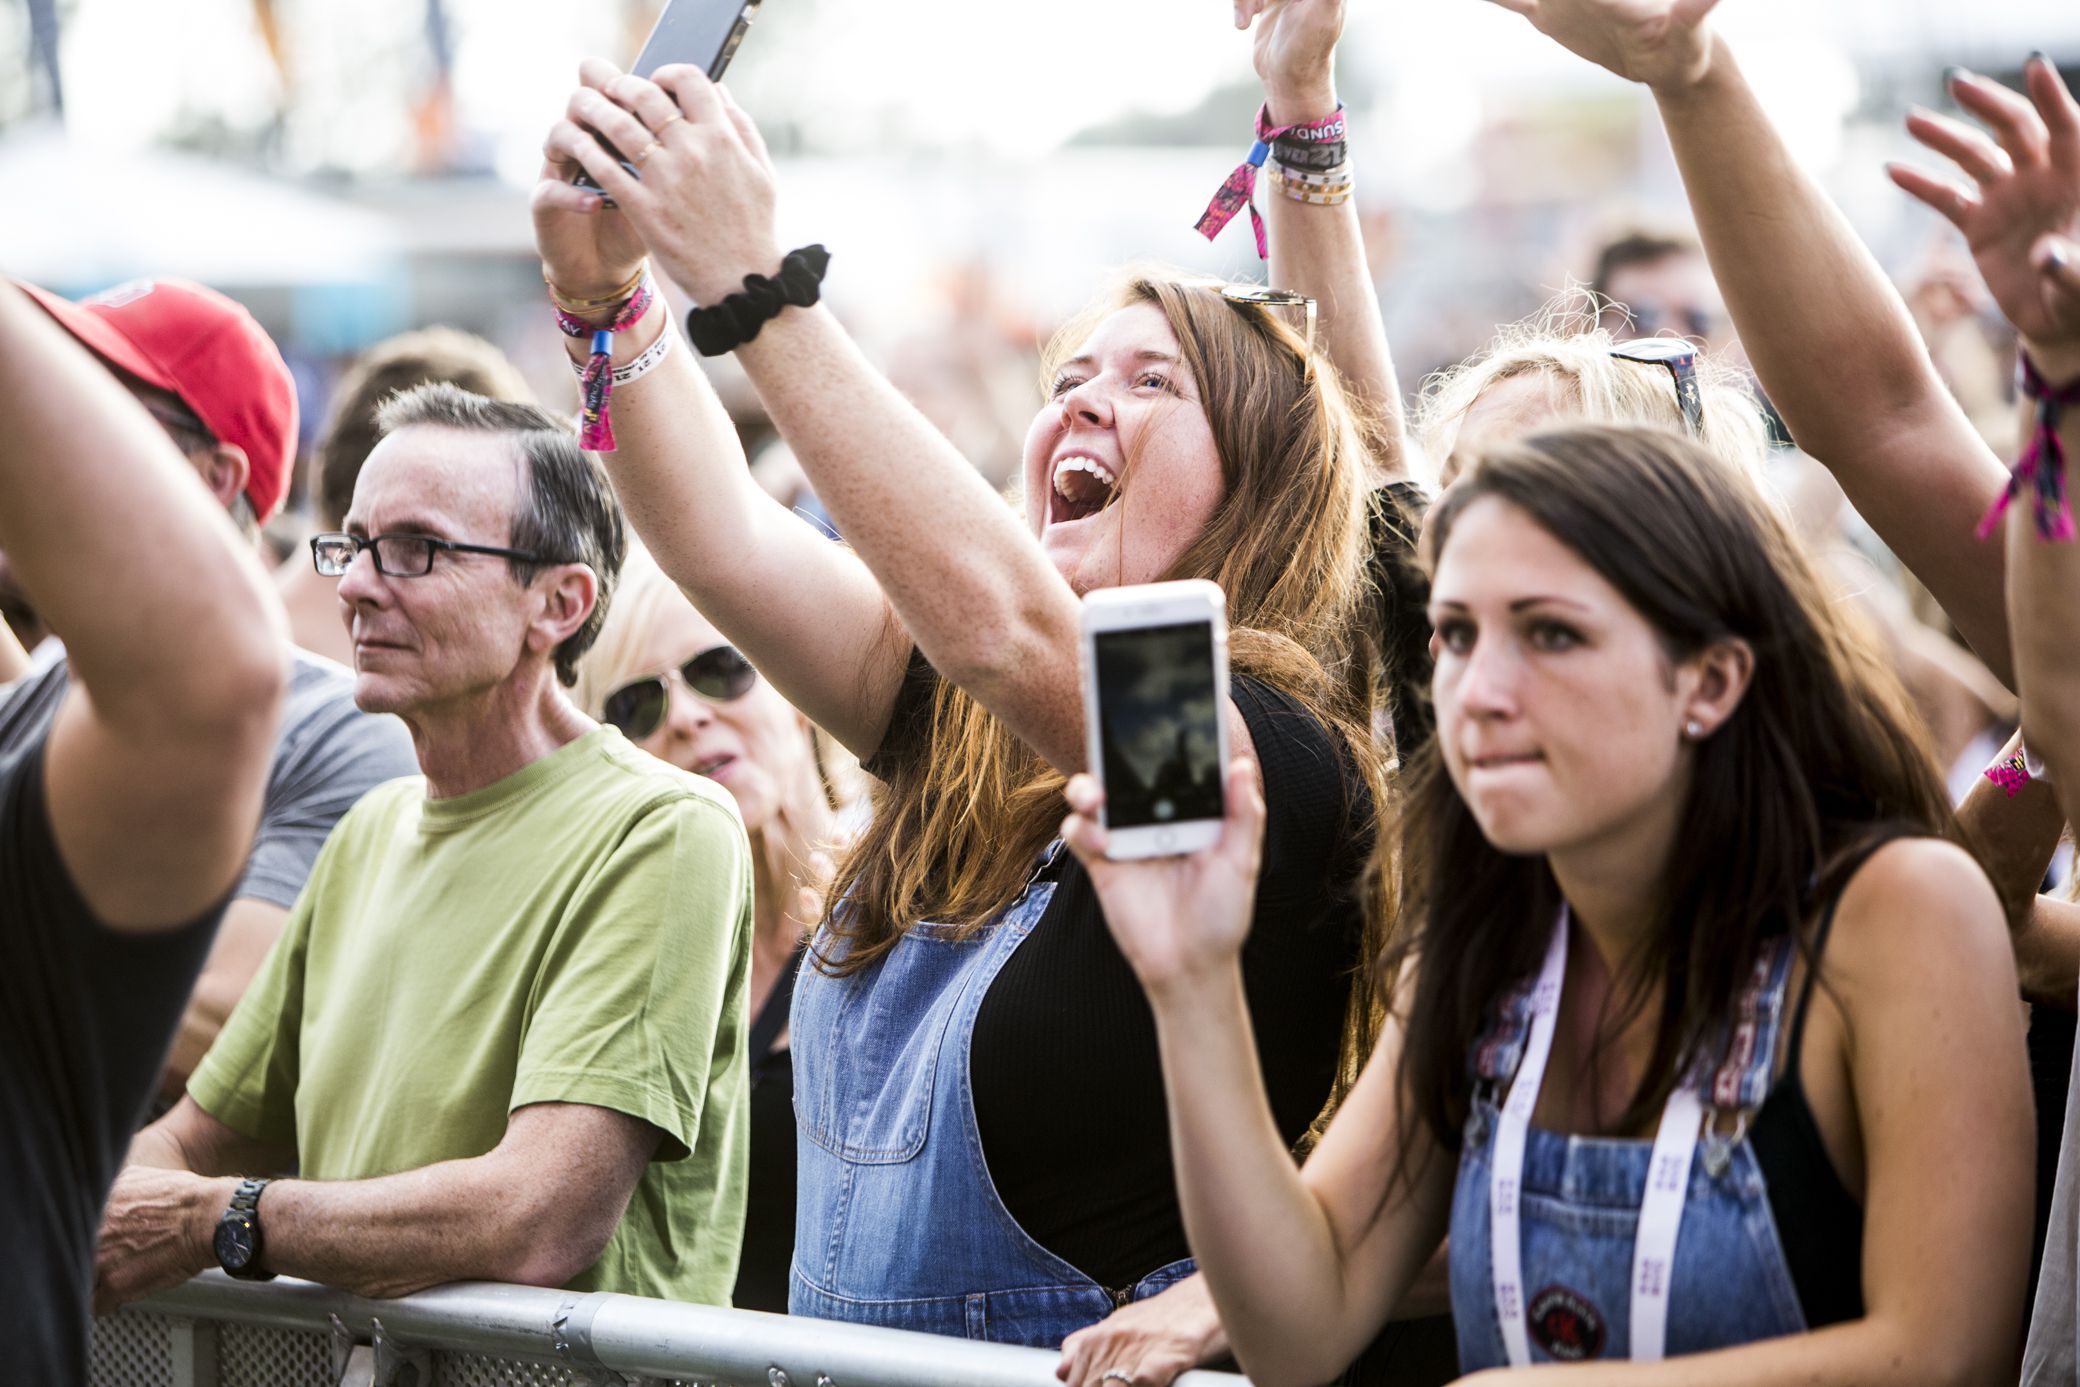 kaaboo 4 3 KAABOO Del Mar Succeeds at Being a Festival for Everyone